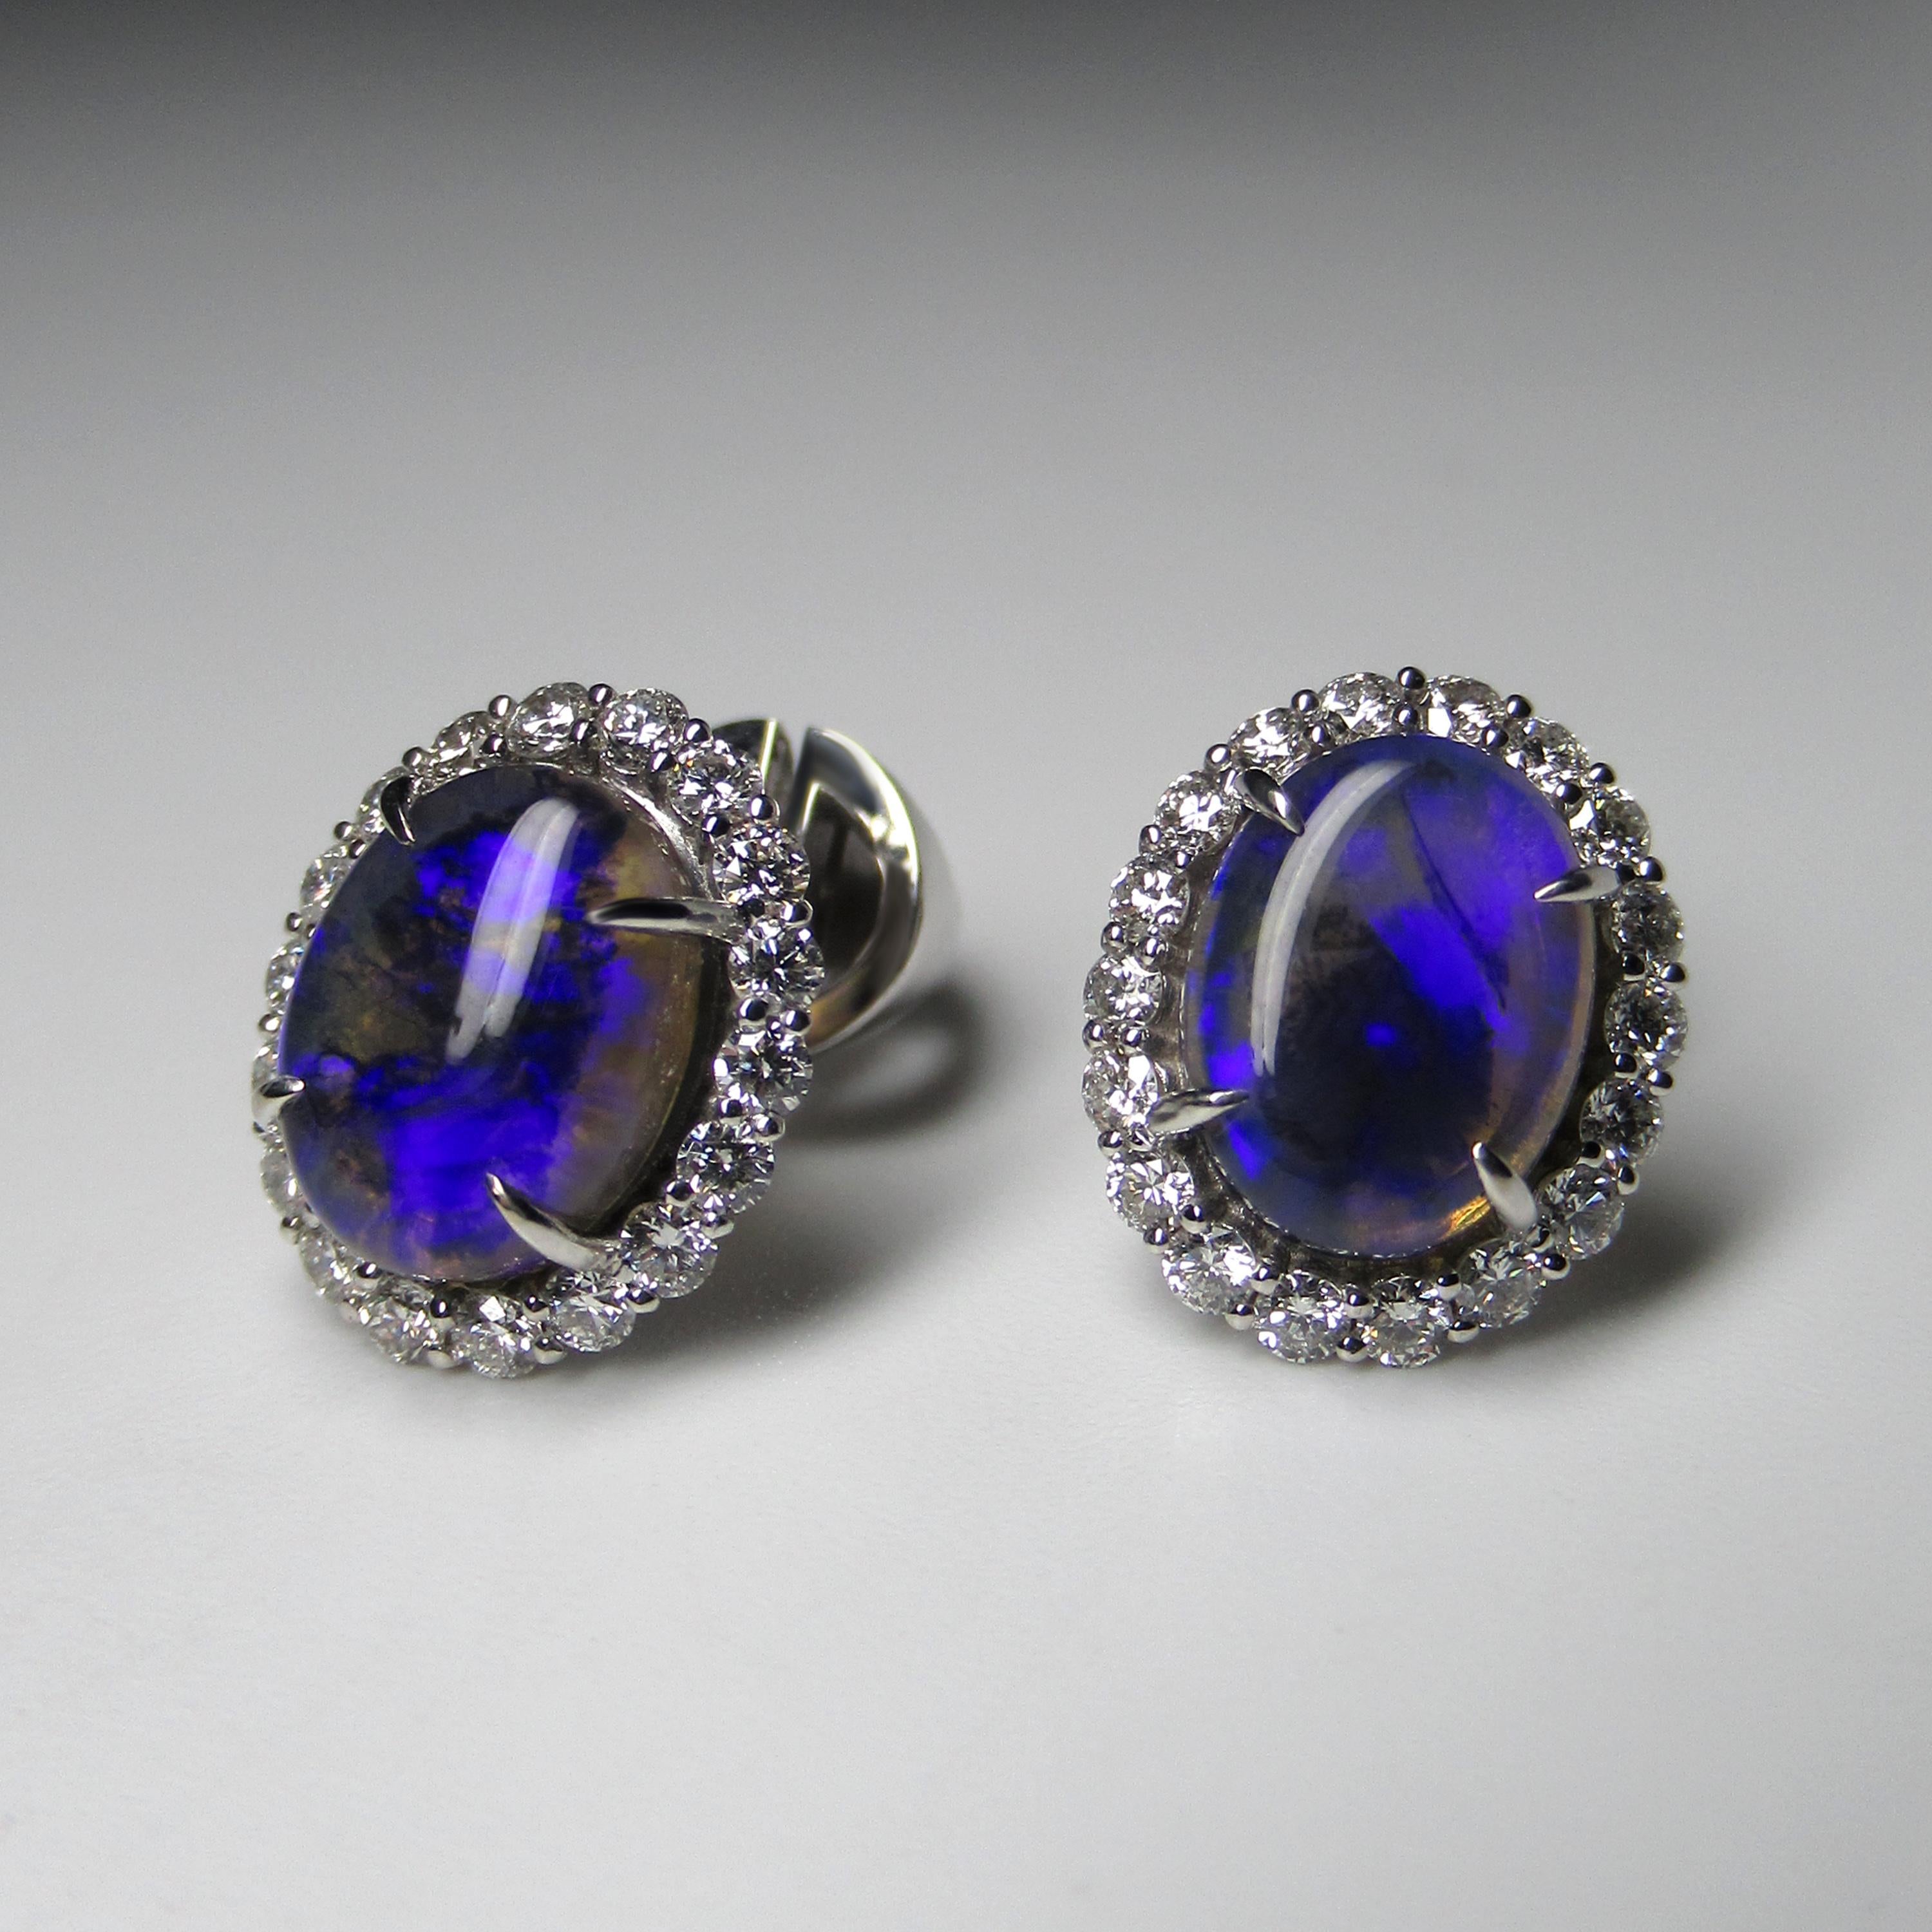 Black Opal 14K white gold earrings 
opal origin - Australia
opal weight - 2.43 carats
earring weight - 4 grams
stone measurements - 0.12 x 0.24  x 0.31 in / 3 x 6 x 8 mm


We ship our jewelry worldwide – for our customers it is free of charge and